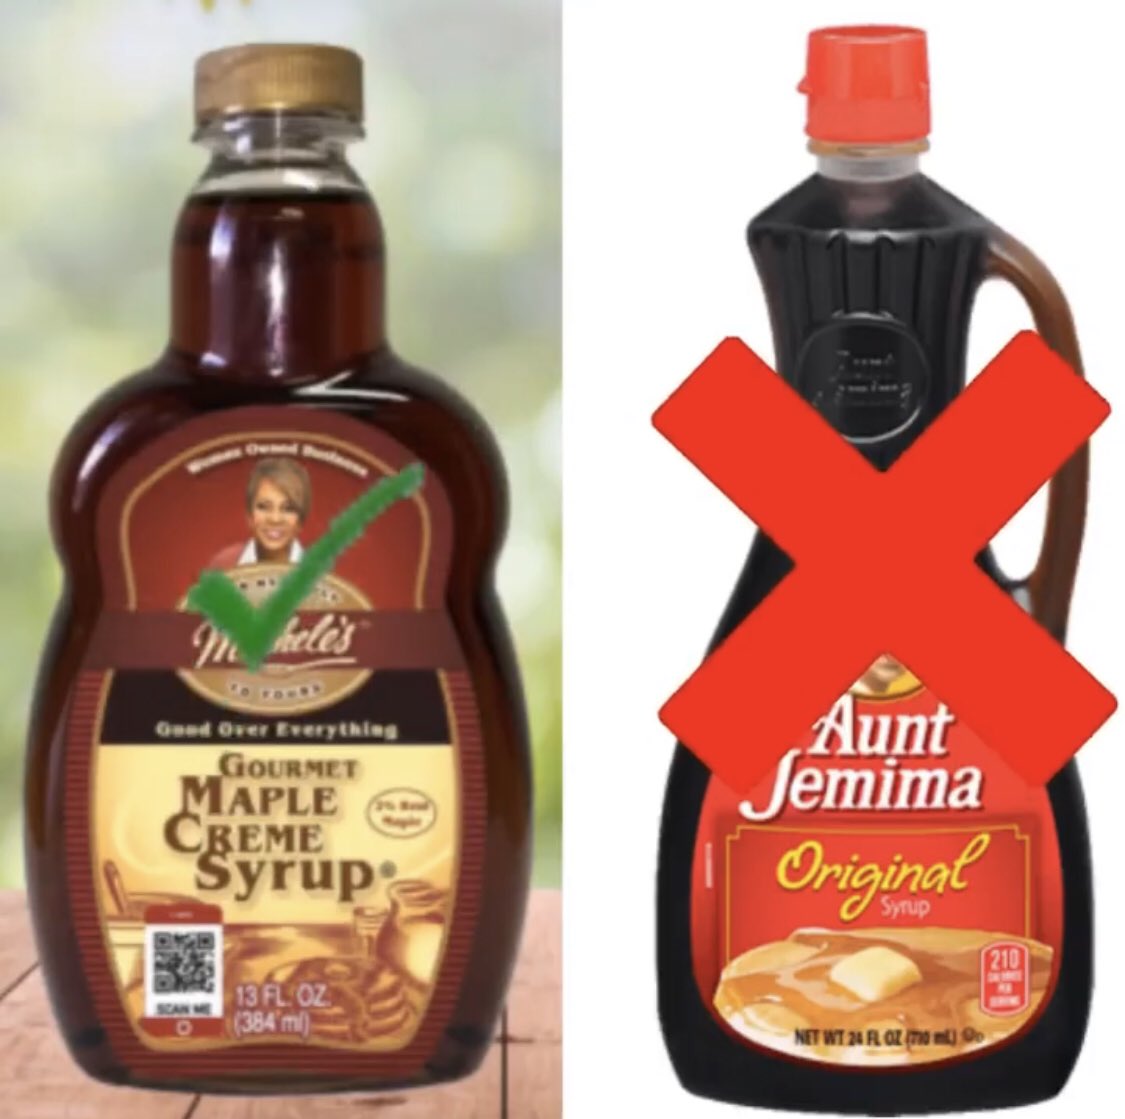 Black Owned Business:If you’re still using Aunt Jemima Pancake and Syrup you need to ditch them now.Please switch to these Black owned Pancake and Waffle Mixes and Syrup Businesses. I added some history on the racist past on the Aunt Jemima brand in the thread.Thread: